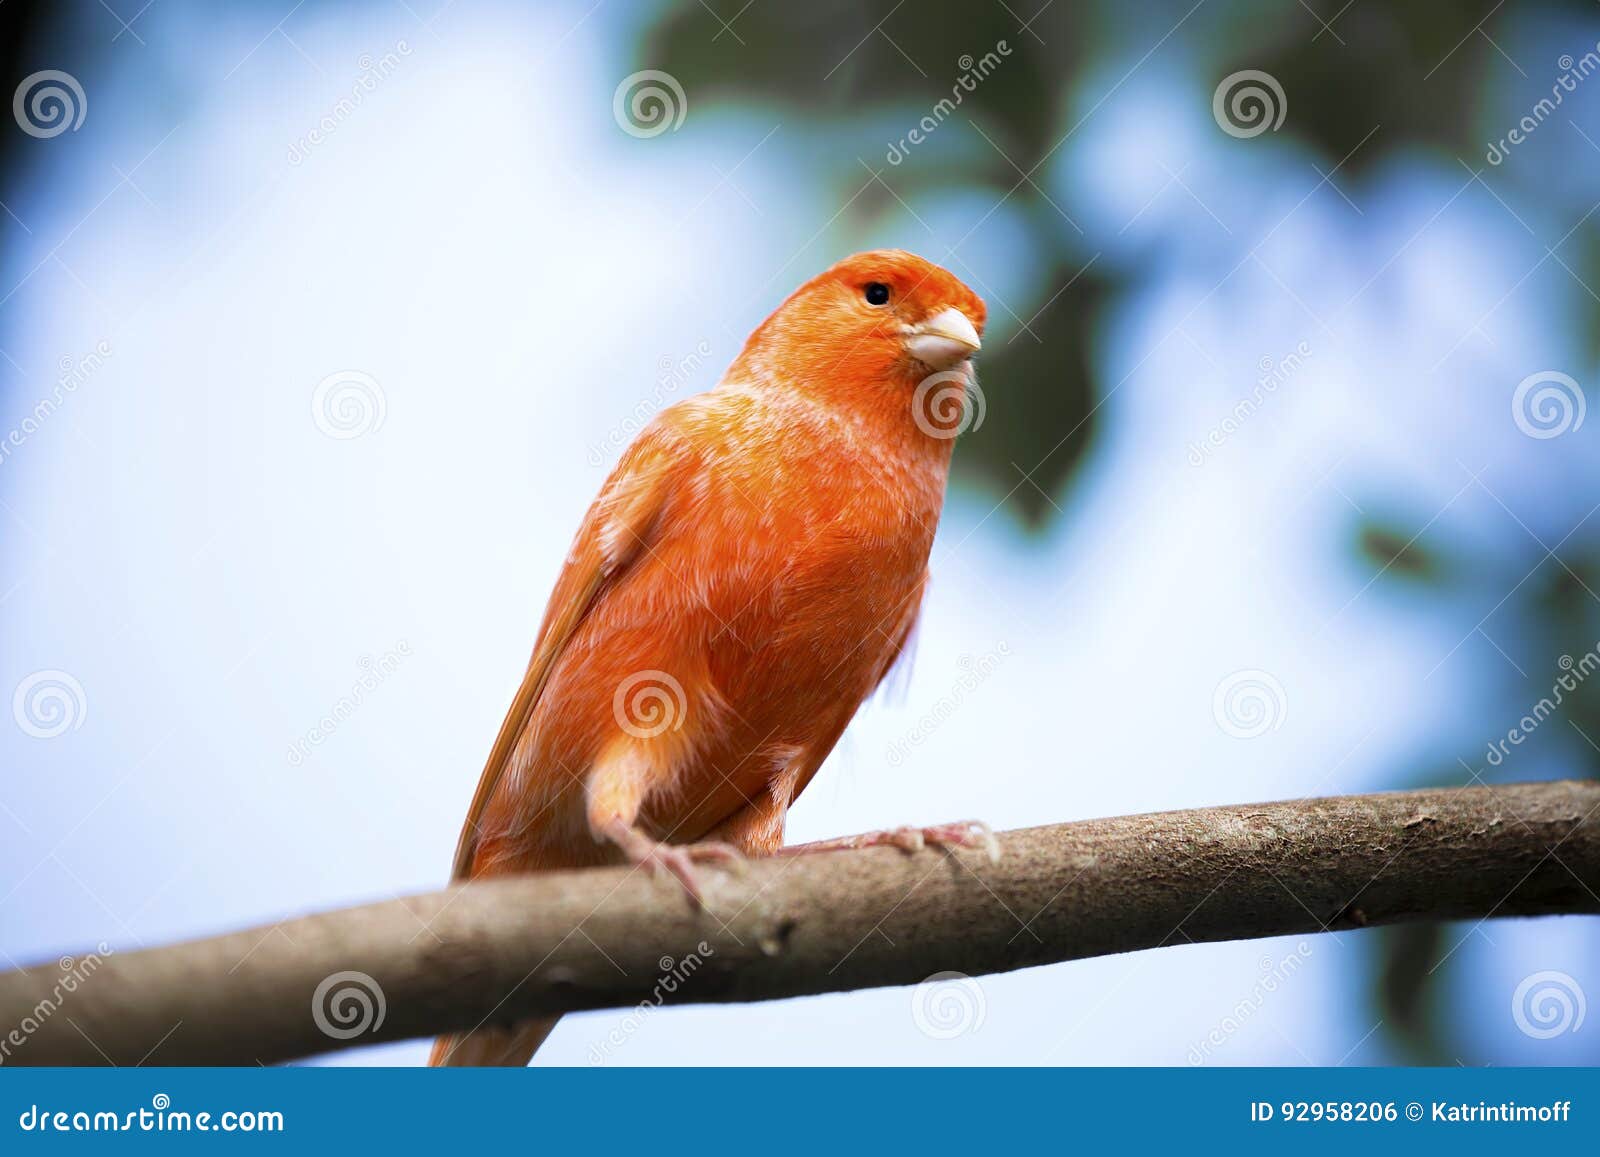 red canary on its perch in front